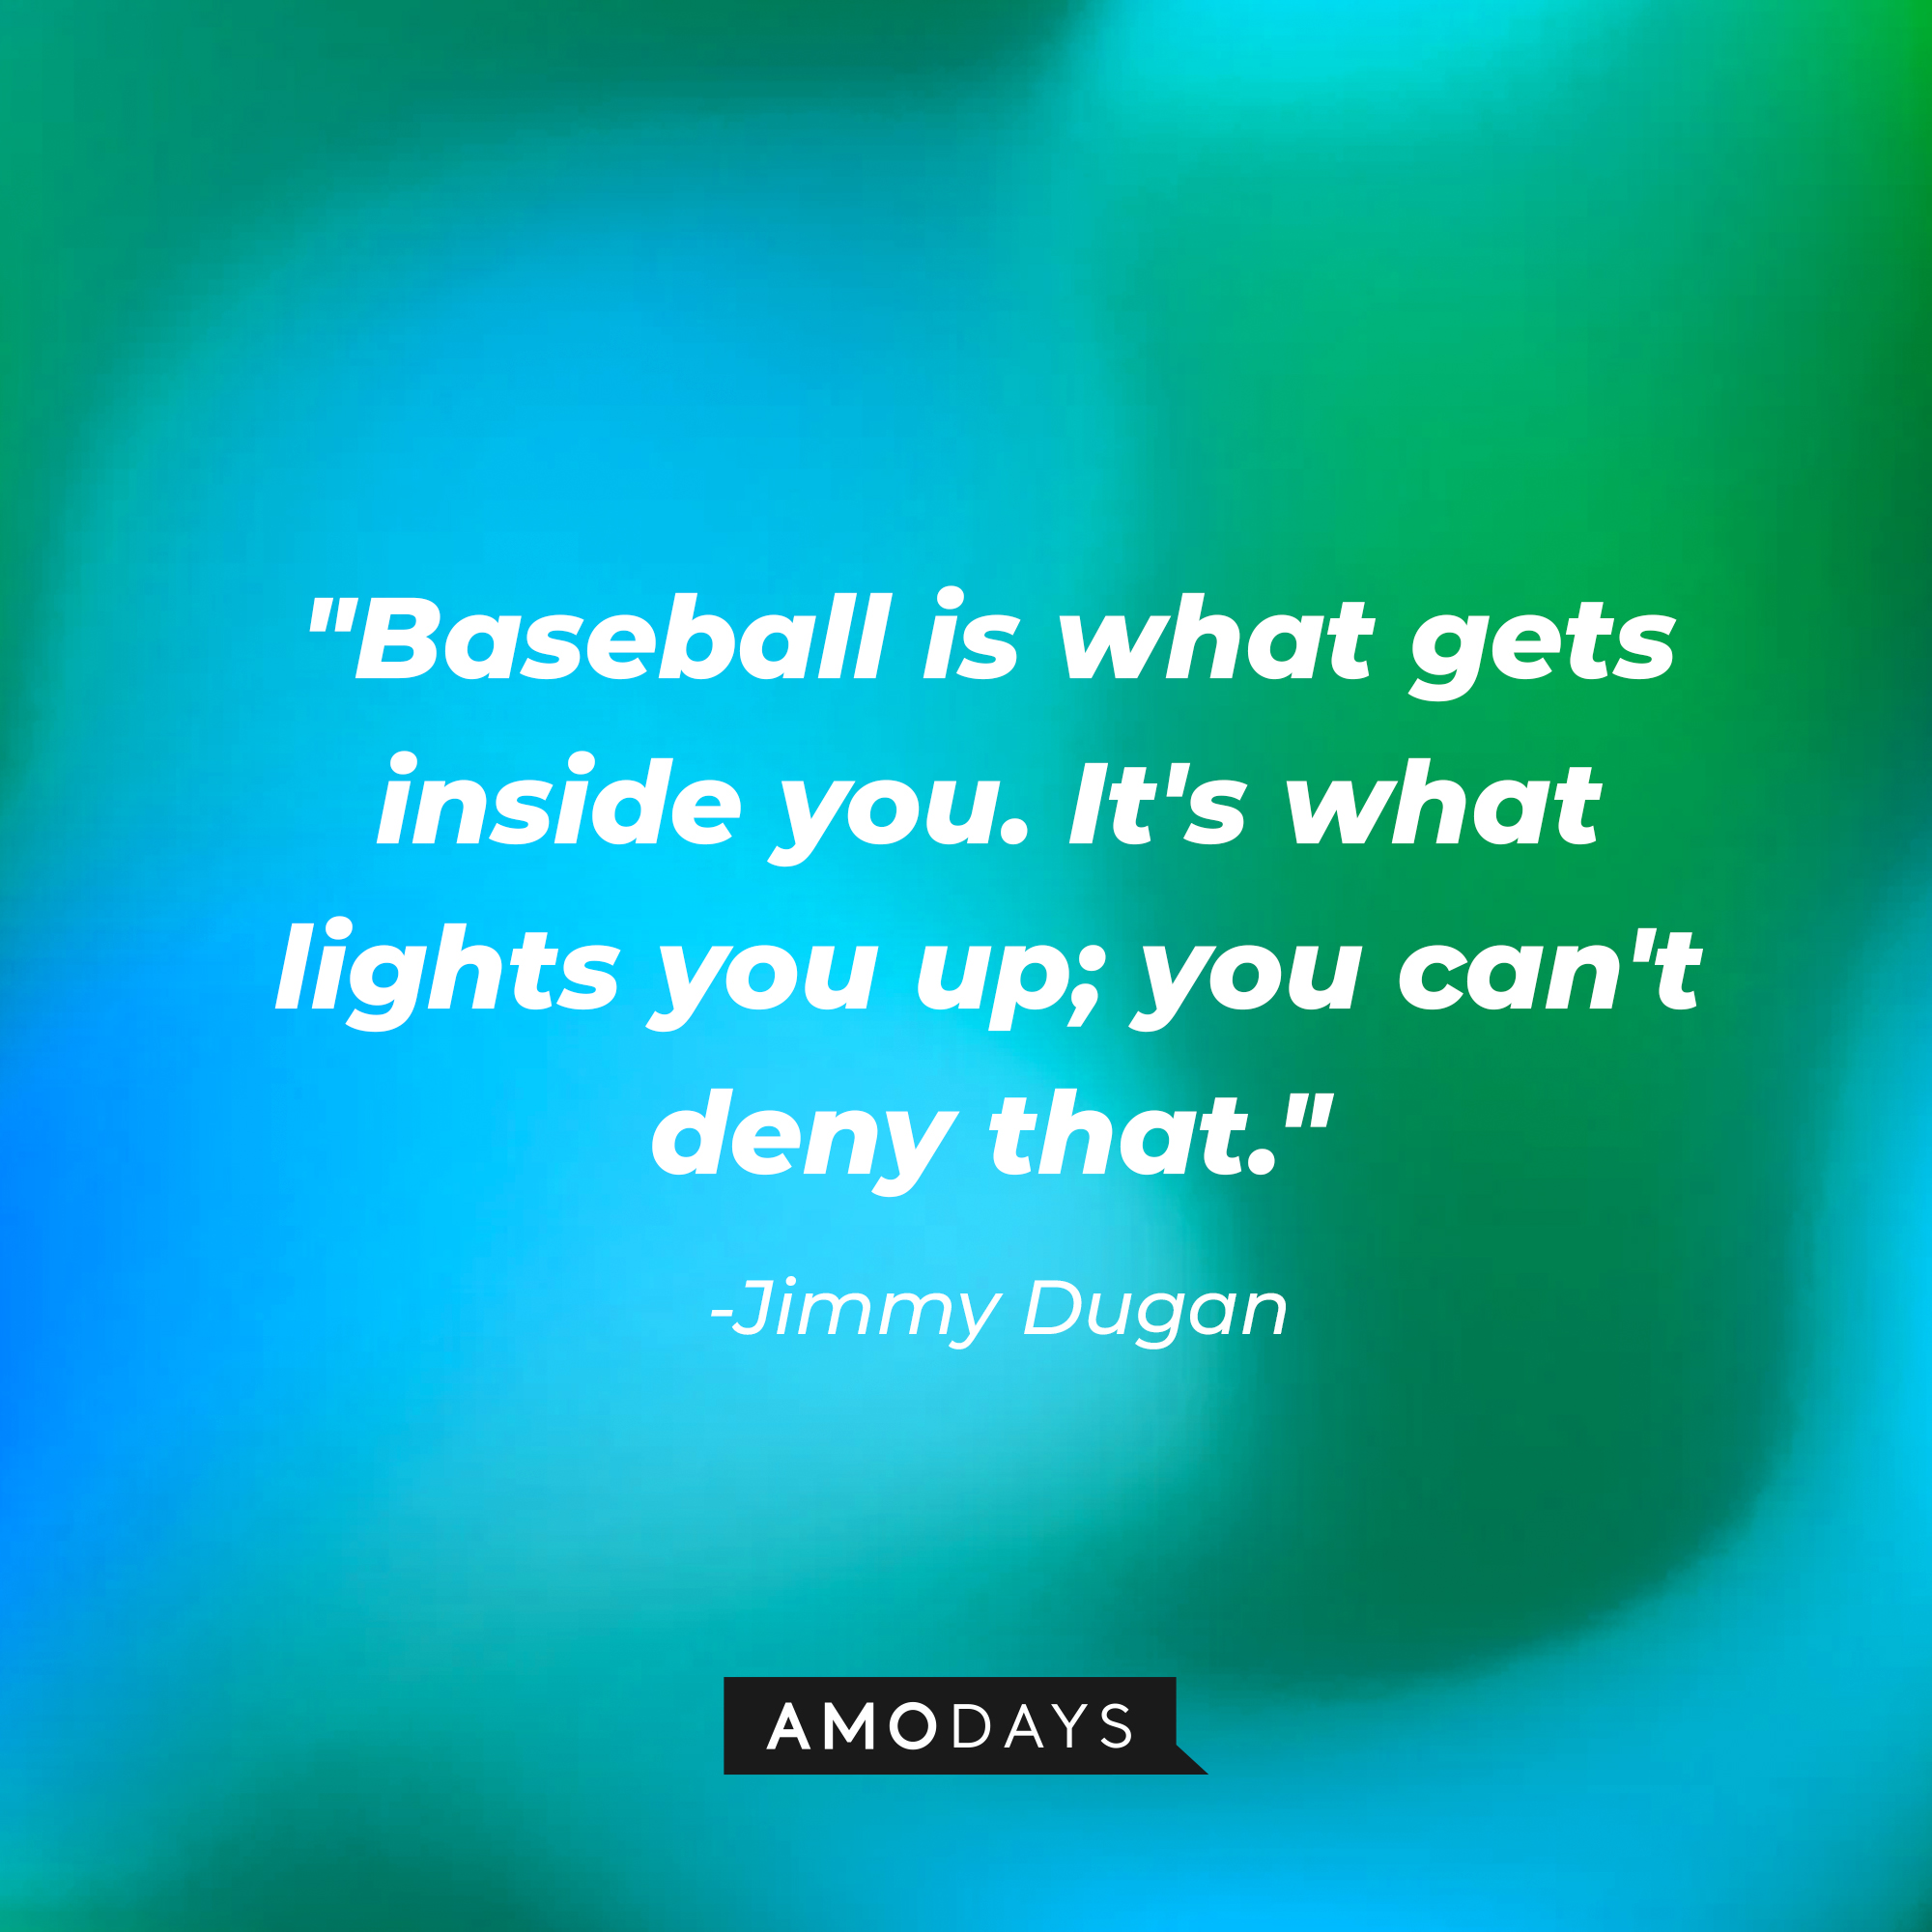 Jimmy Dugan's quote: "Baseball is what gets inside you. It's what lights you up; you can't deny that." | Source: AmoDays